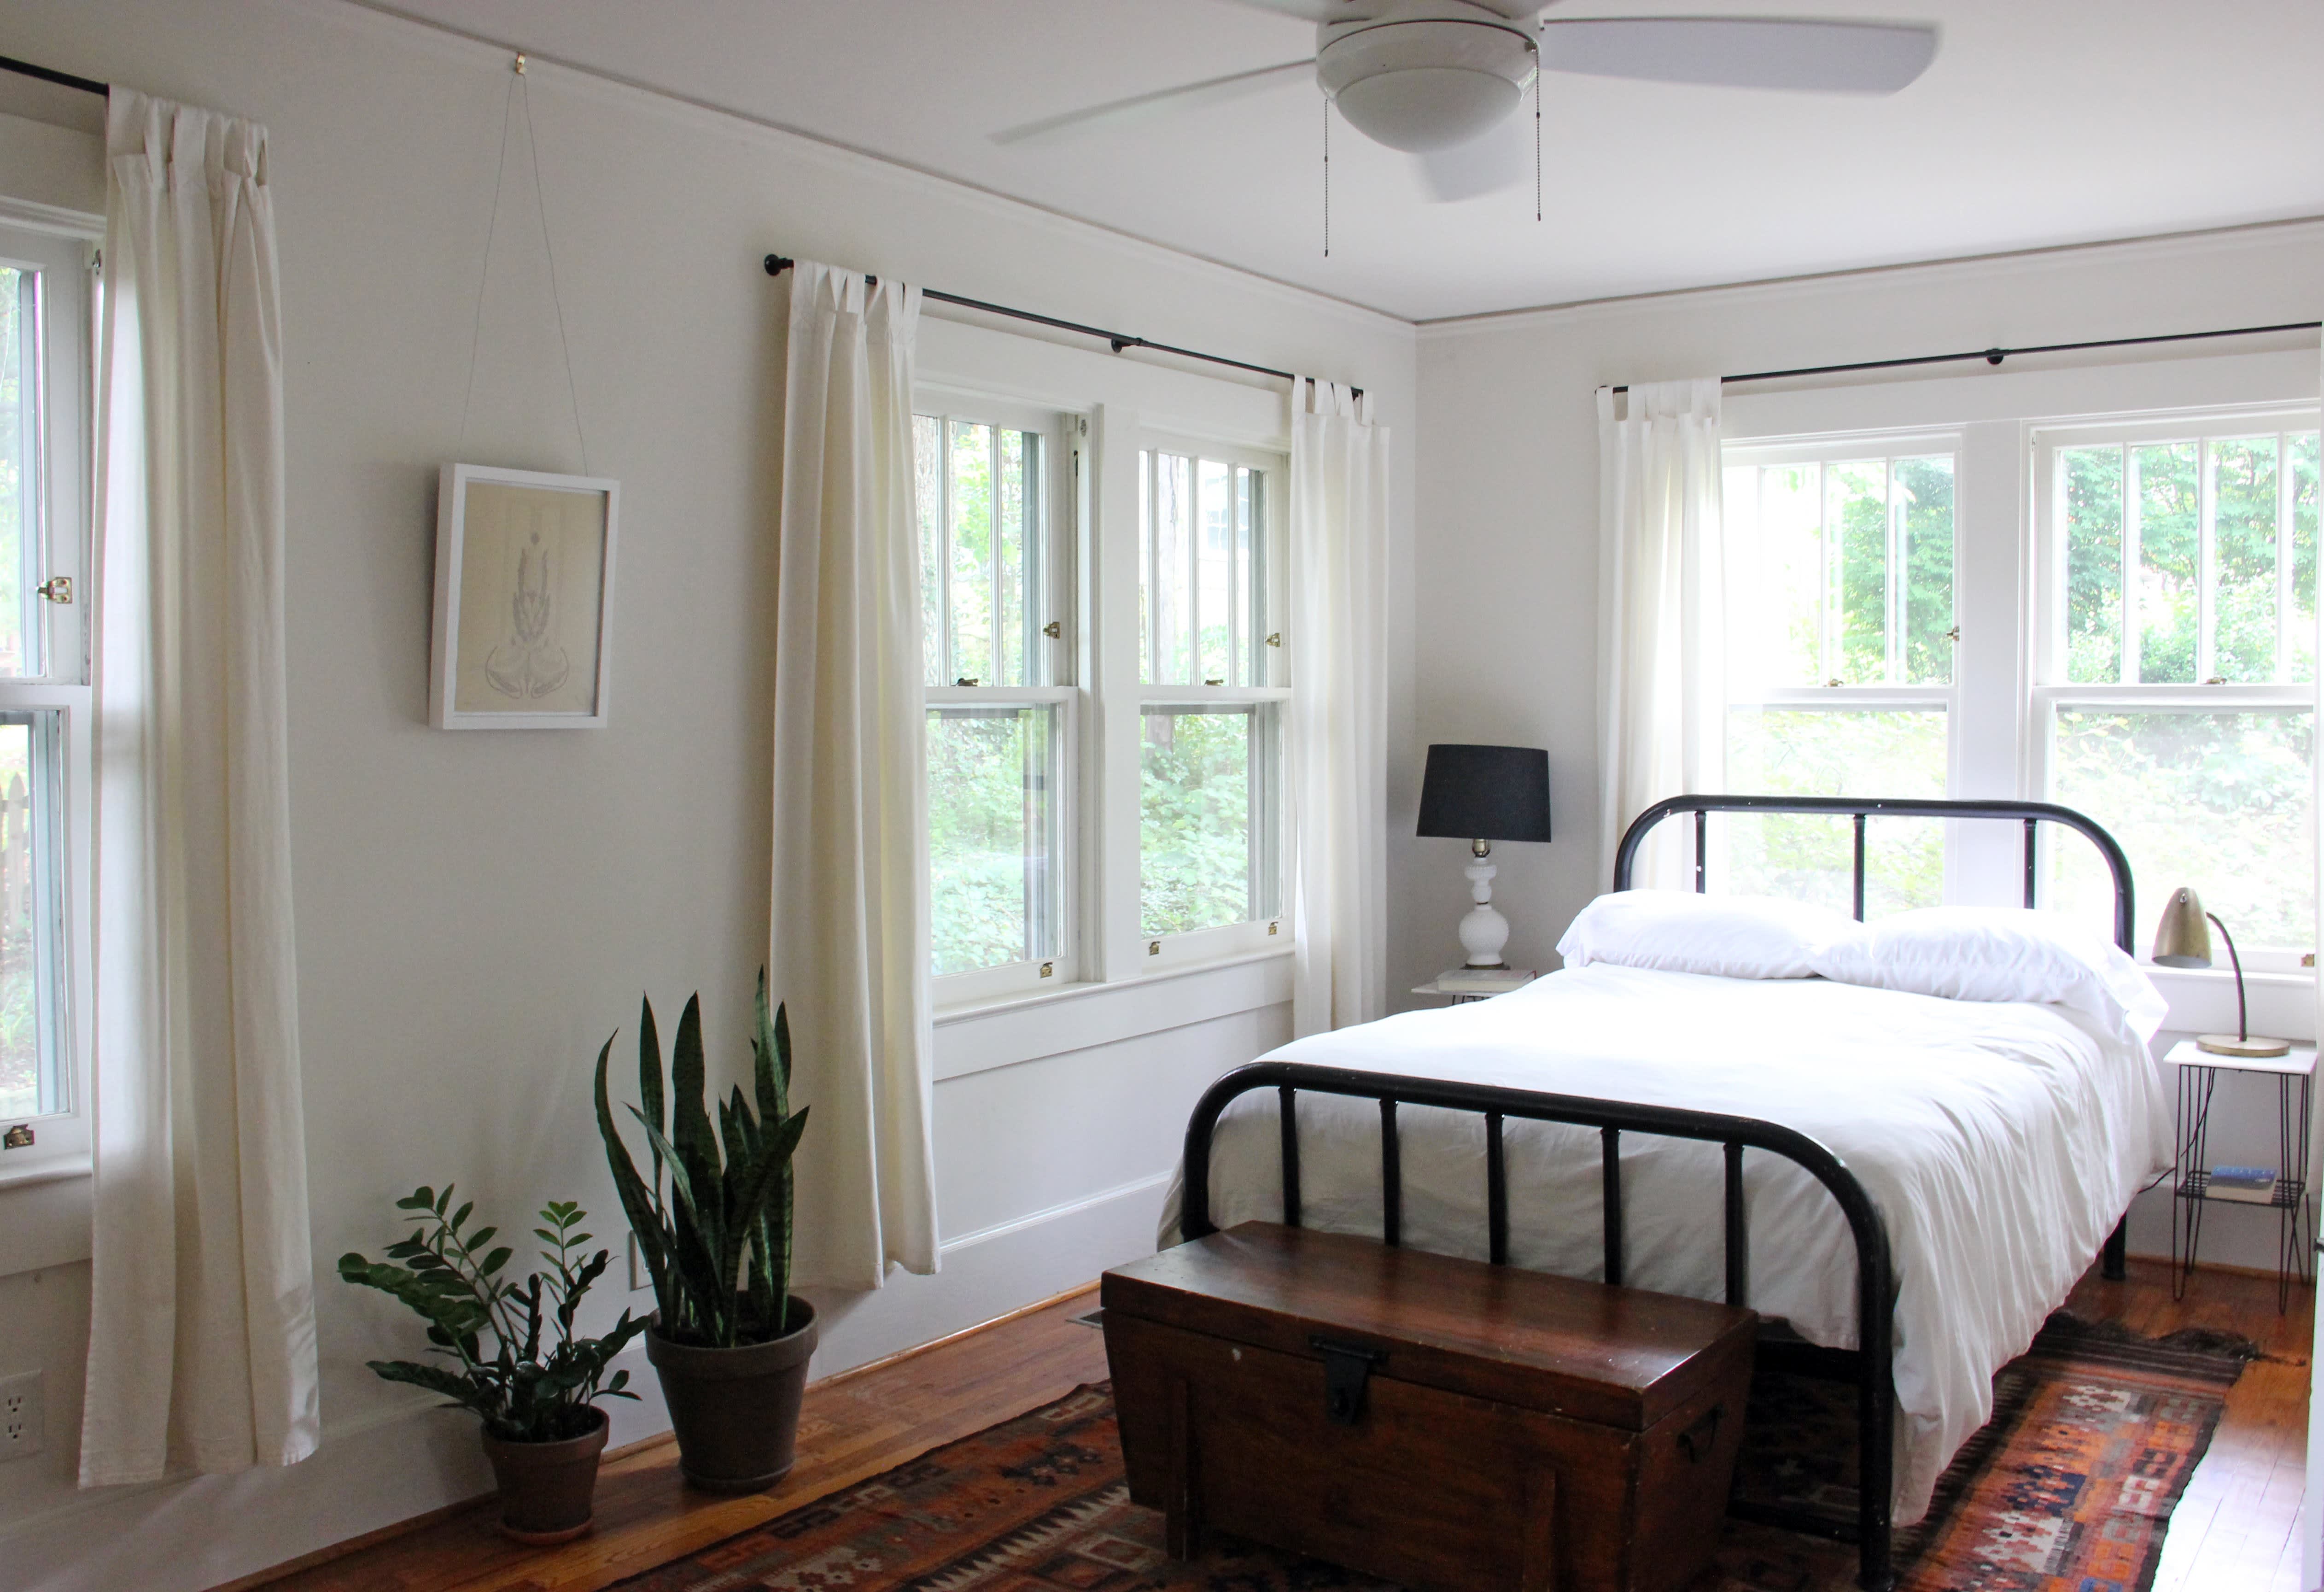 6 Easy Ways to Hang Curtains Without Drilling Into Walls | Apartment Therapy